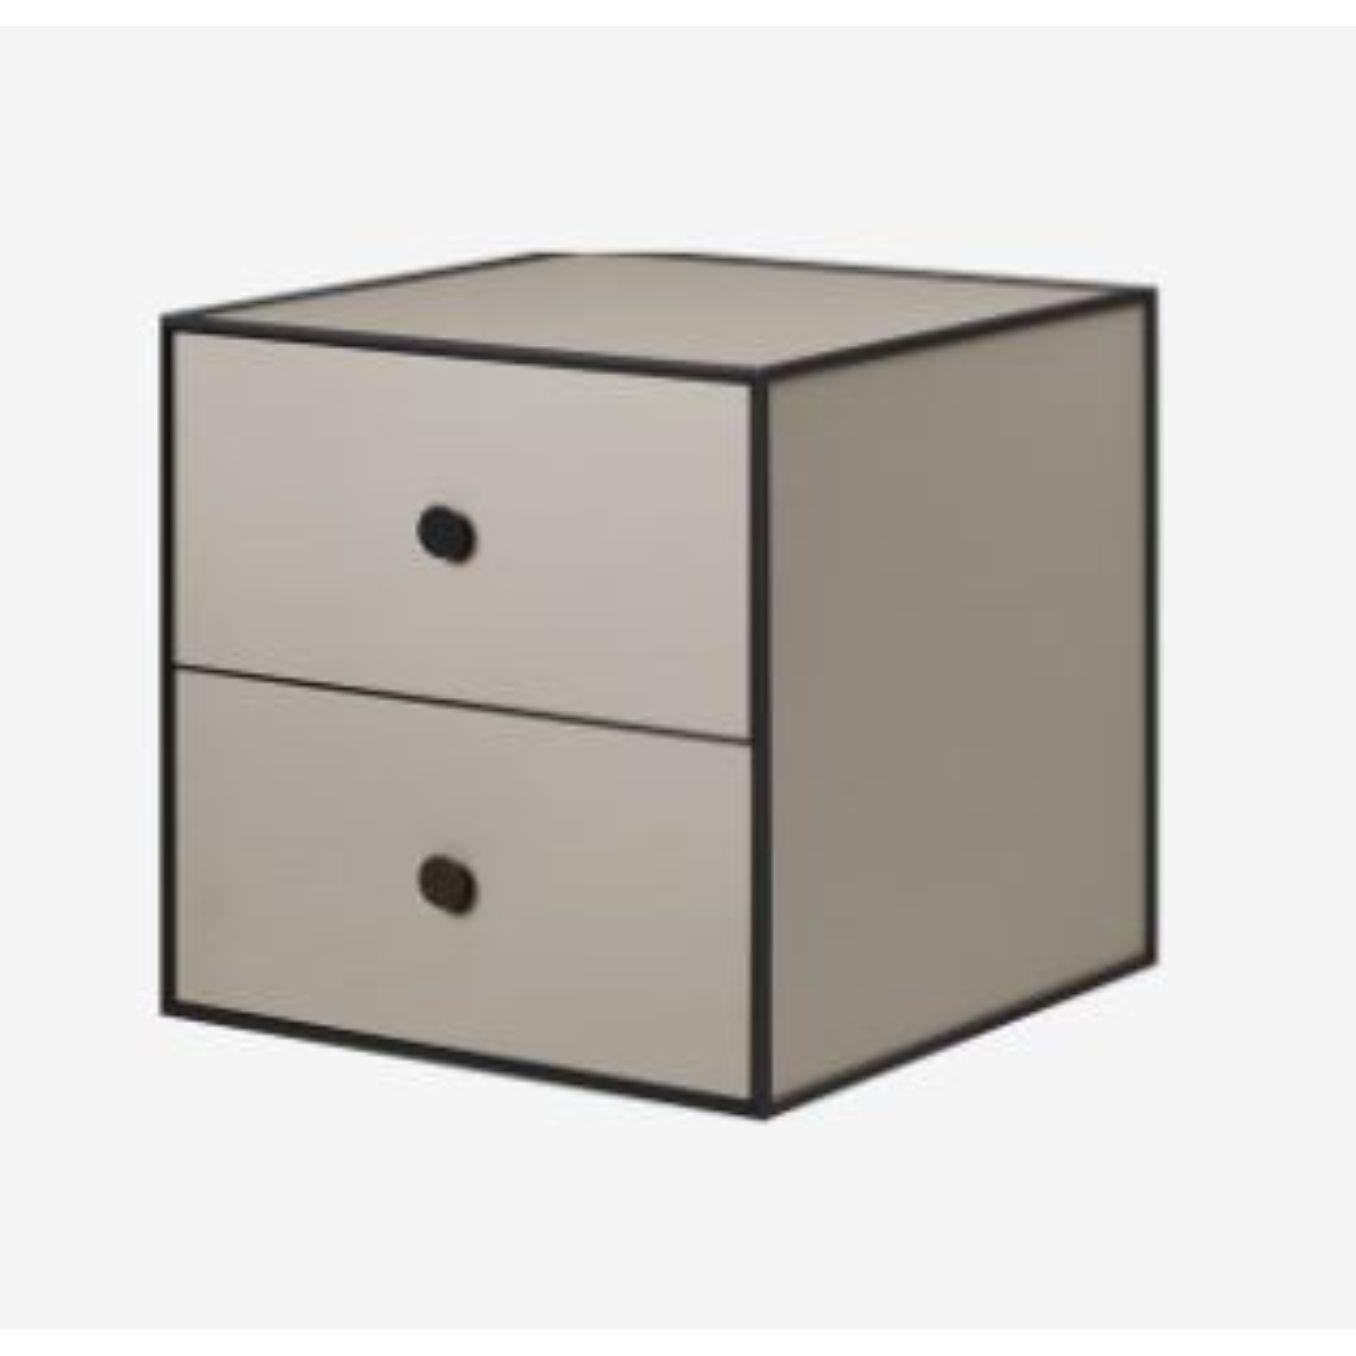 35 sand frame box with 2 drawer by Lassen
Dimensions: W 35 x D 35 x H 35 cm 
Materials: Finér, Melamin, Melamin, Melamine, Metal, Veneer,
Also available in different colours and dimensions. 
Weight: 10.50, 10.50, 11.50, 11.50 Kg

Frame